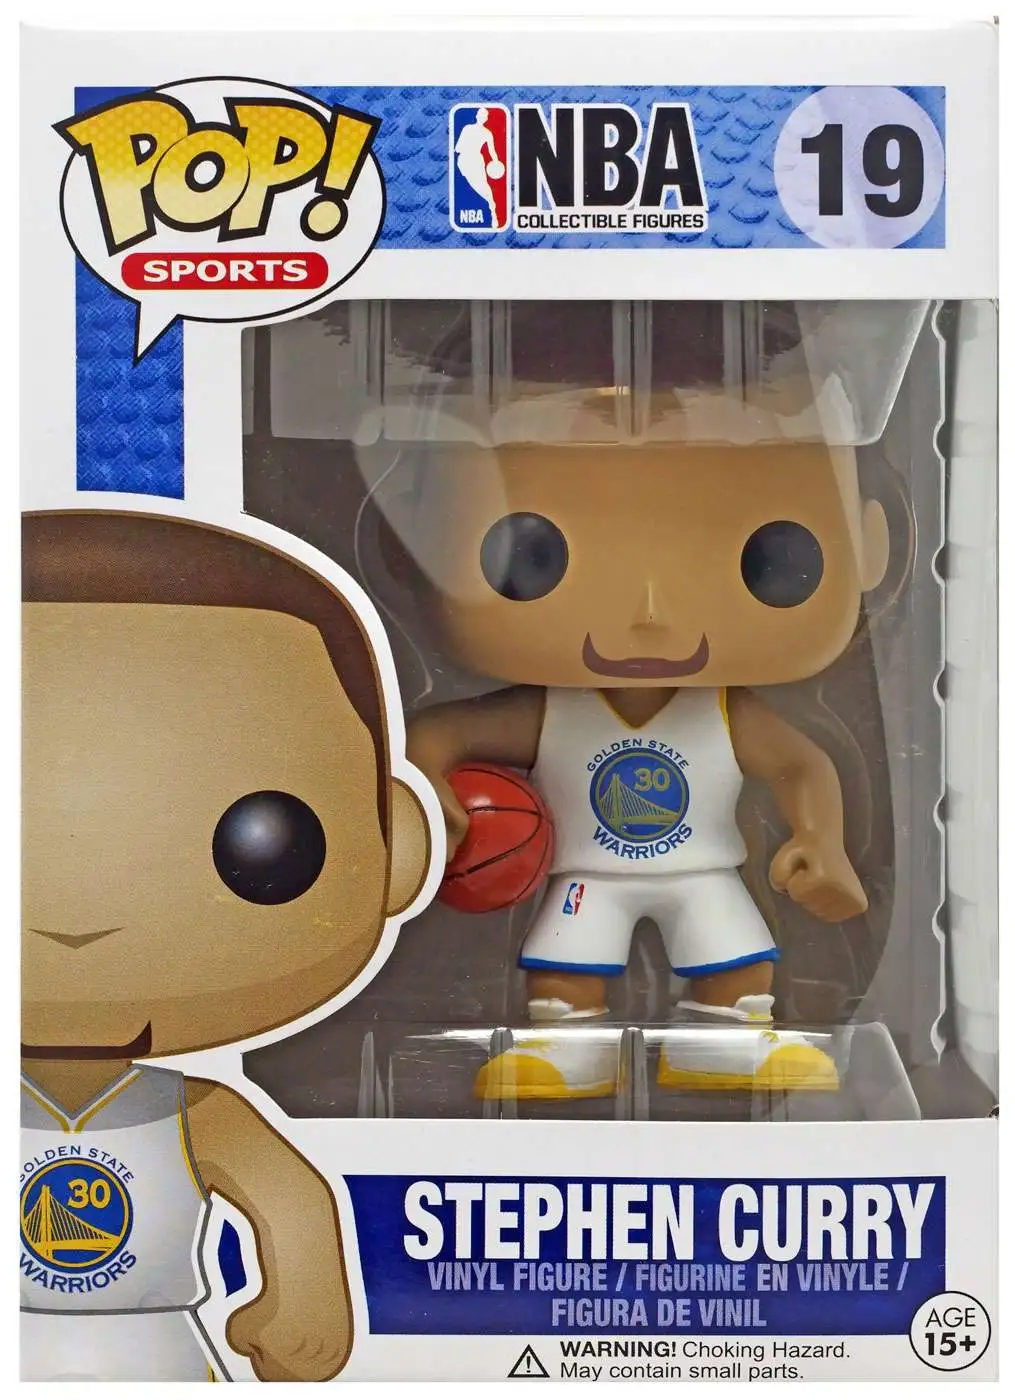 Stephen Curry Golden State Warriors Autographed Funko Pop! Figurine -  Limited Edition of 100